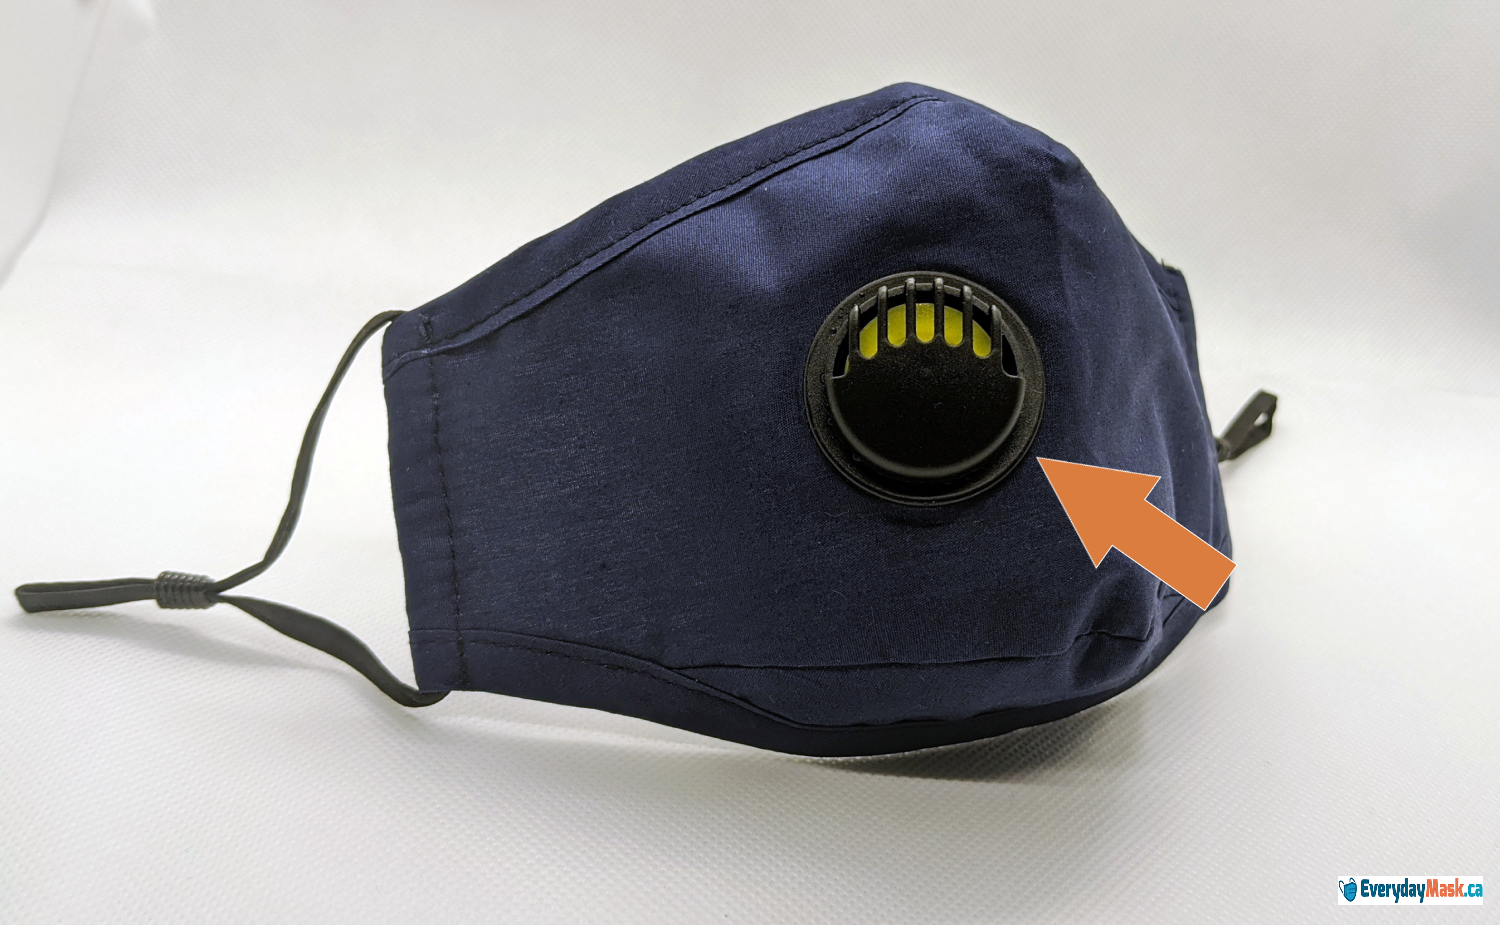 Image of a navy blue mask with breatning valve ( vent, respirator, exhalation valve).